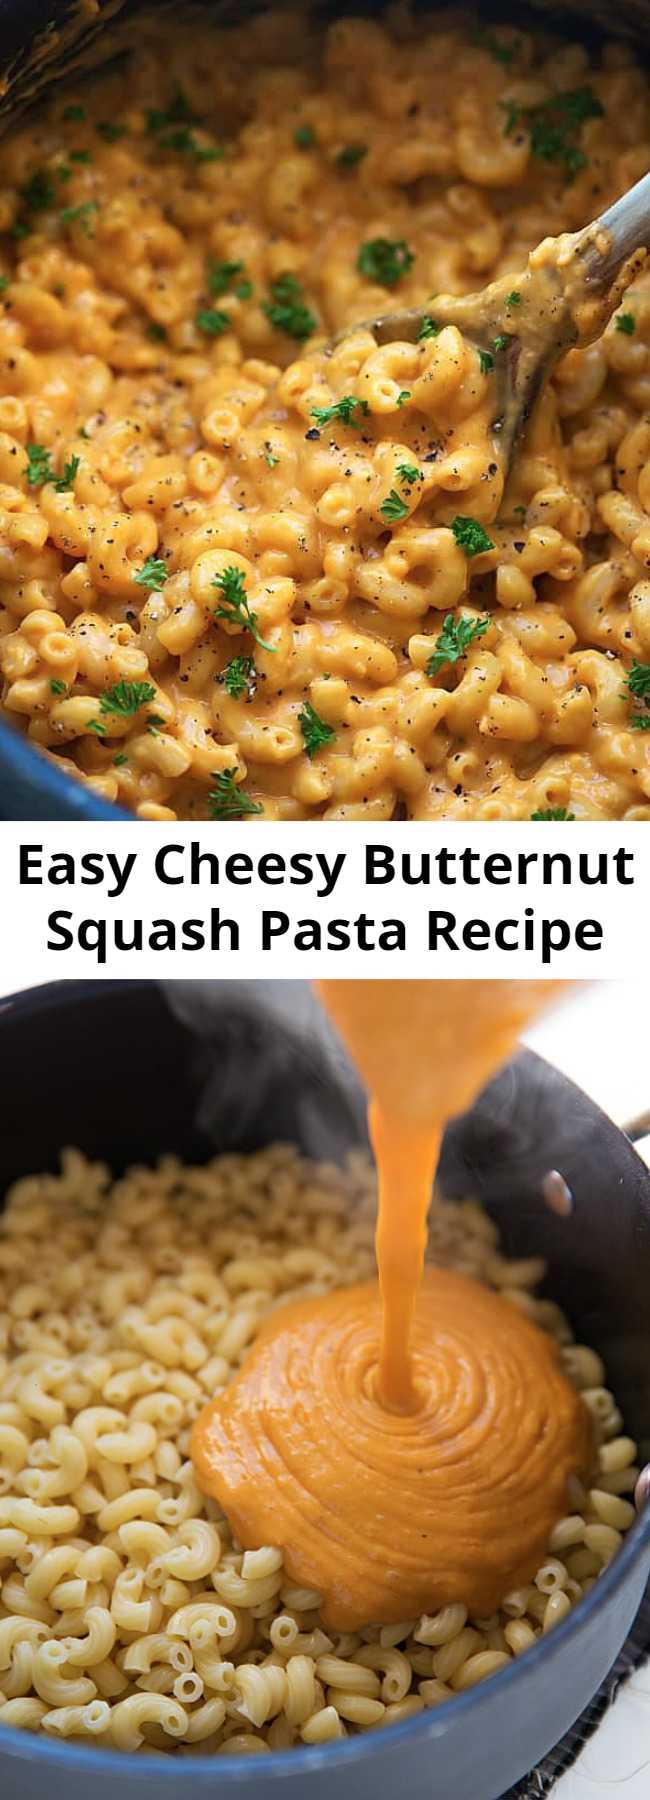 Easy Cheesy Butternut Squash Pasta Recipe - A quick and simple pasta dish that is cheesy and made with a seasonal ingredient– butternut squash! A healthier alternative that the family will love!